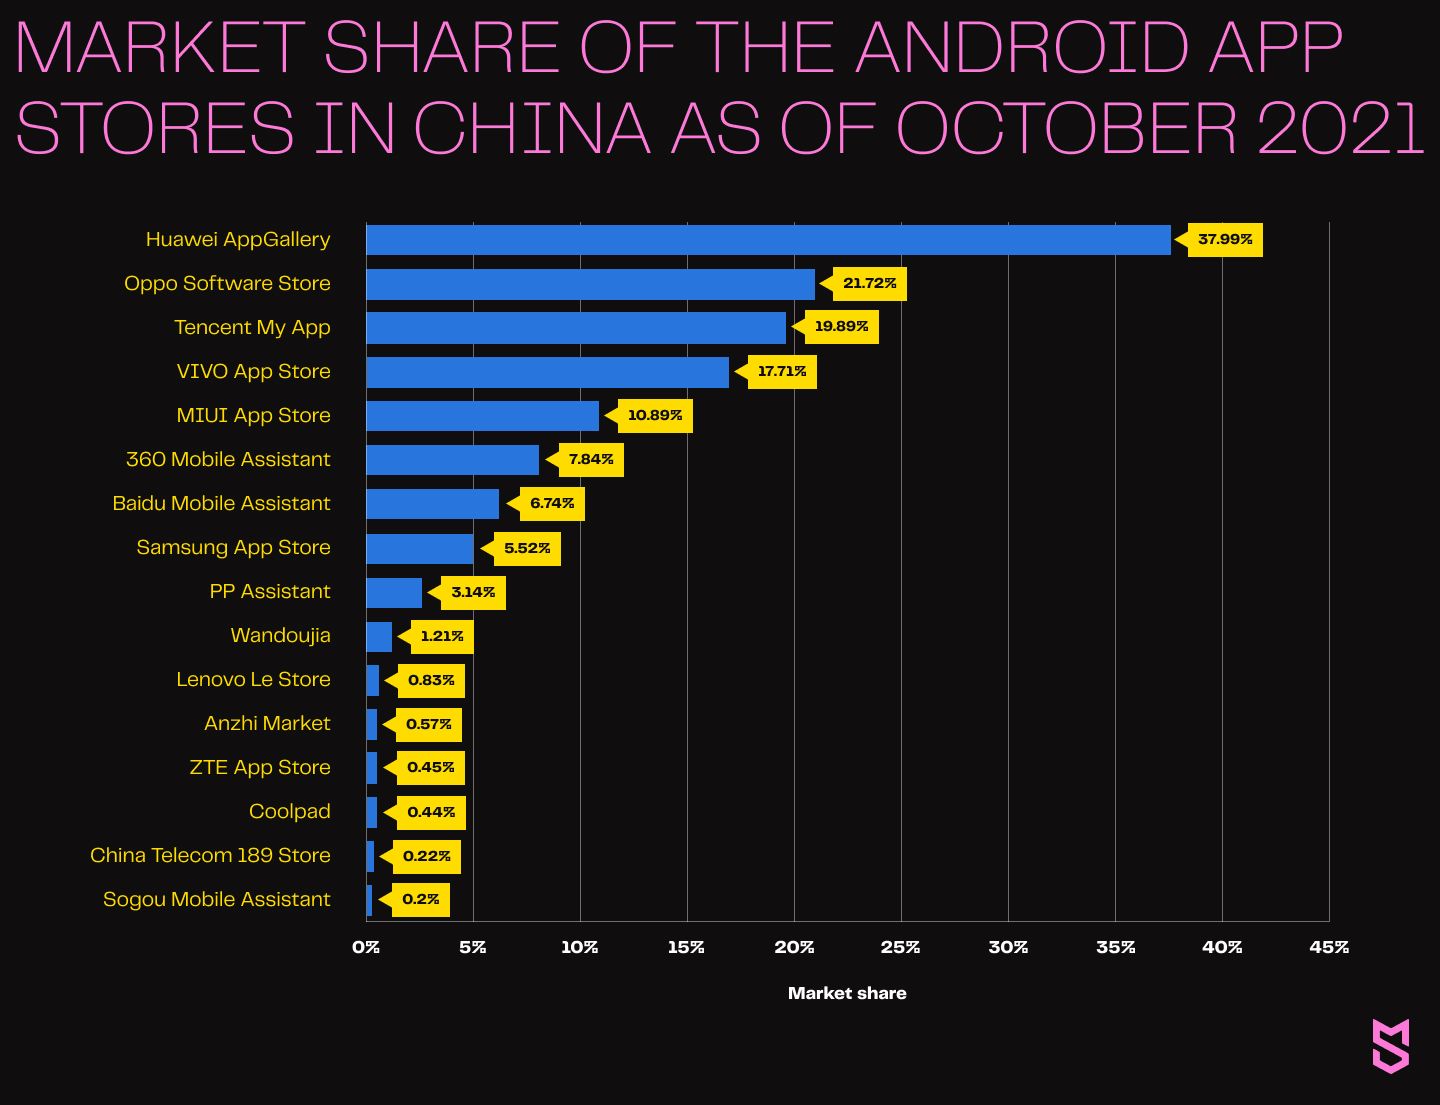 Market share of the Android app stores in China as of October 2021